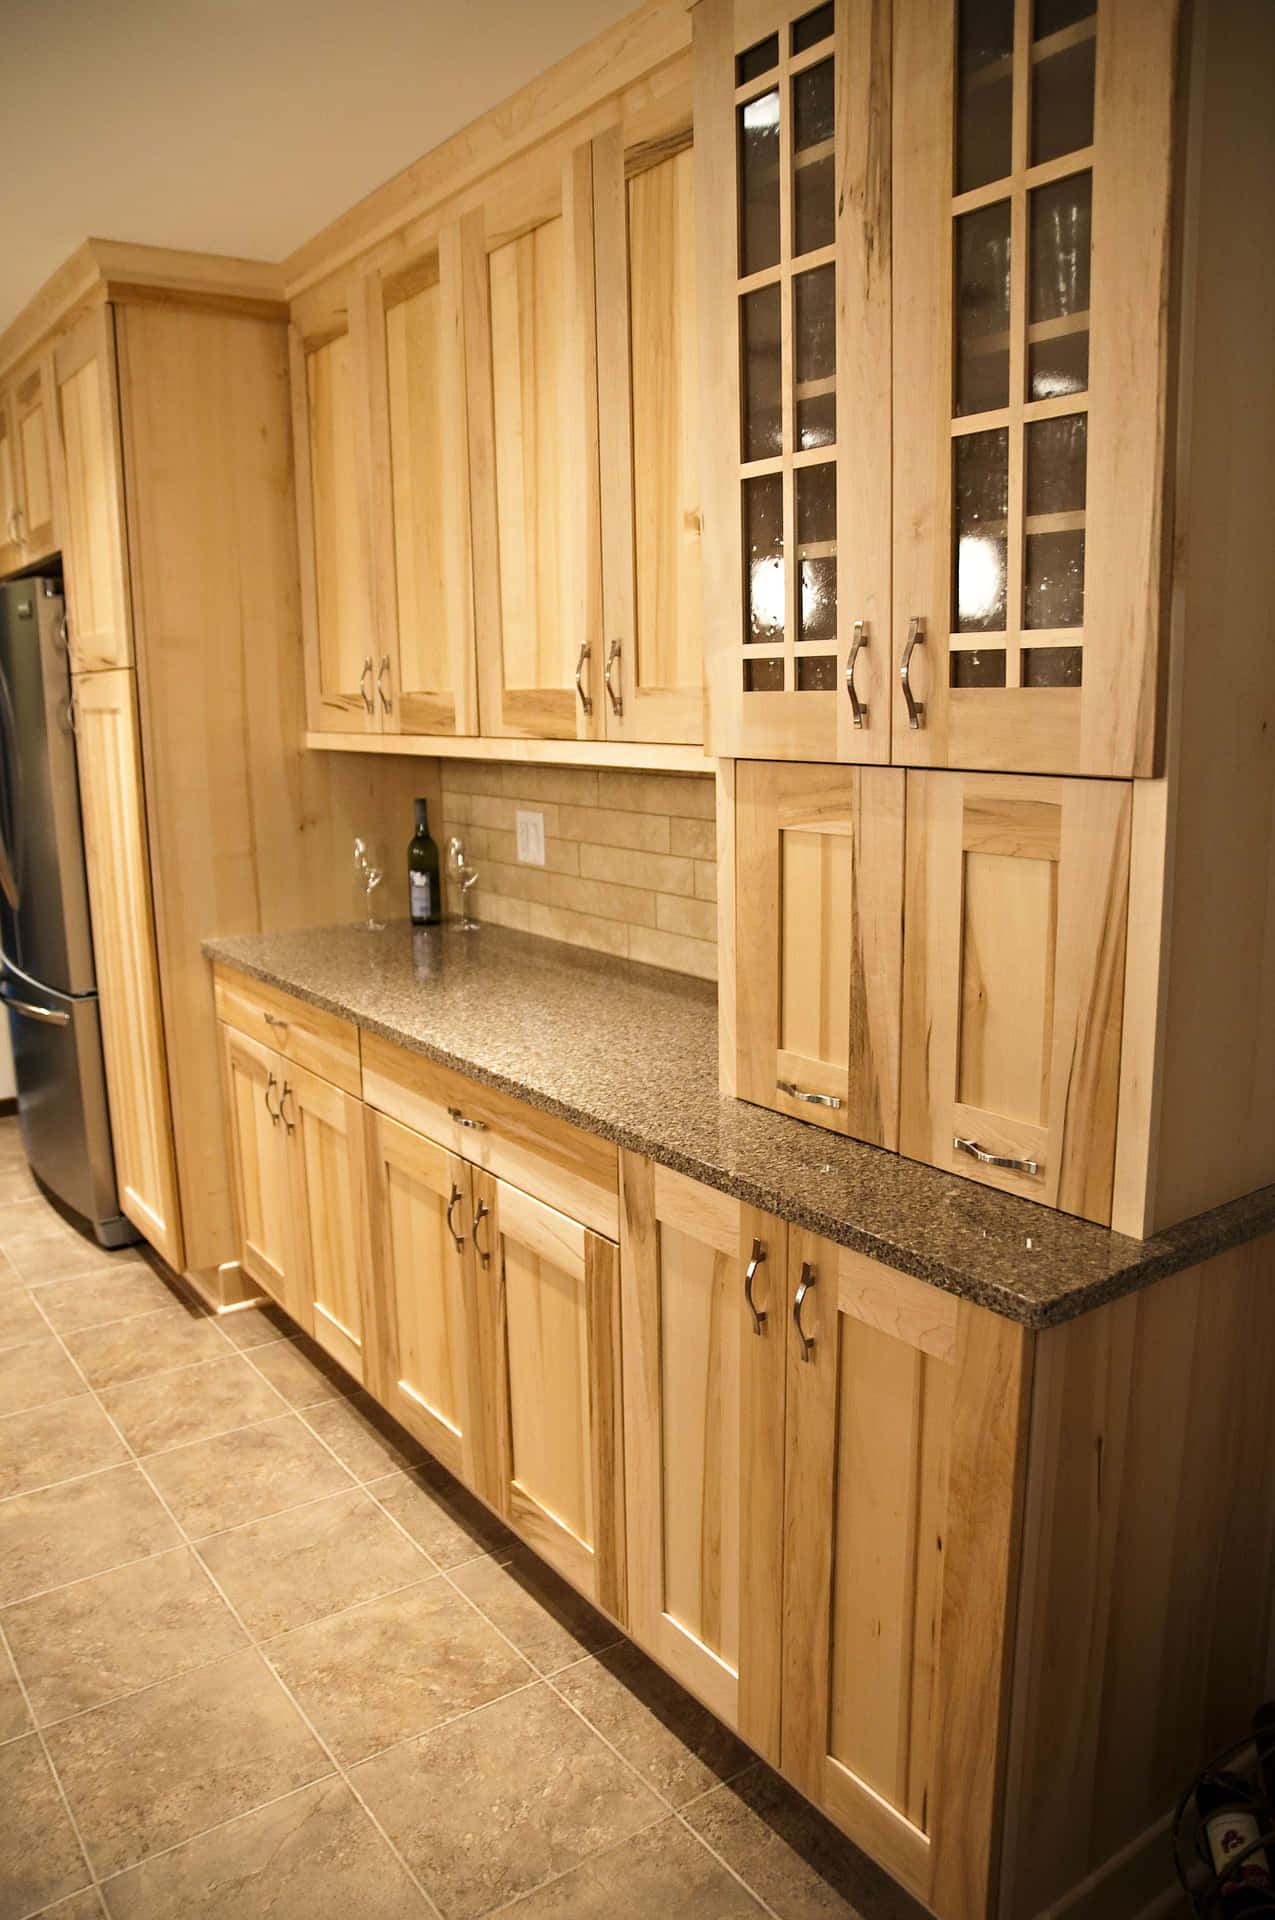 Utilizing space efficiently with cabinets